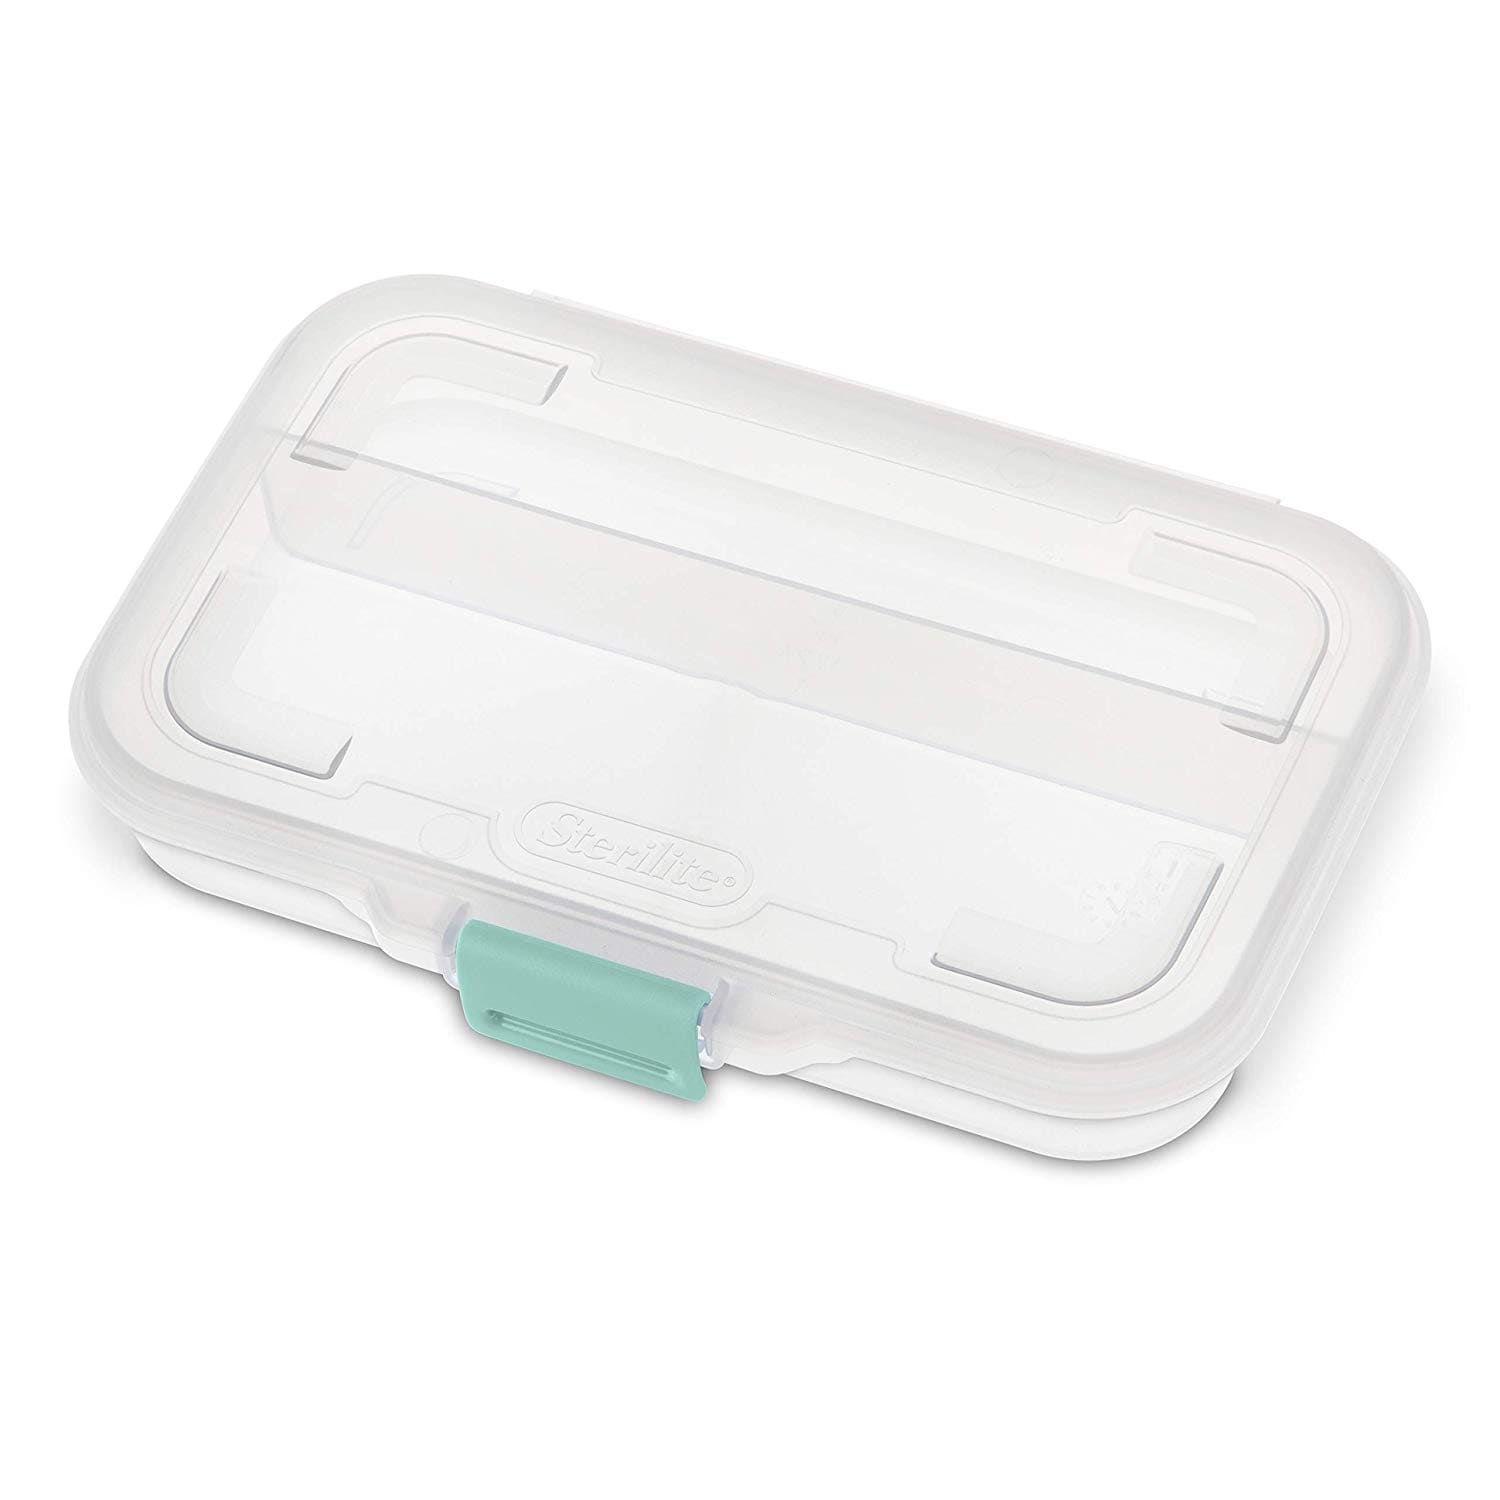 https://ak1.ostkcdn.com/images/products/is/images/direct/1fa6e3ce5079931a85c405558c35a38fb61785c8/Sterilite-Convenient-Small-Divided-Clear-Storage-Box-w--Latching-Lid%2C-%2824-Pack%29.jpg